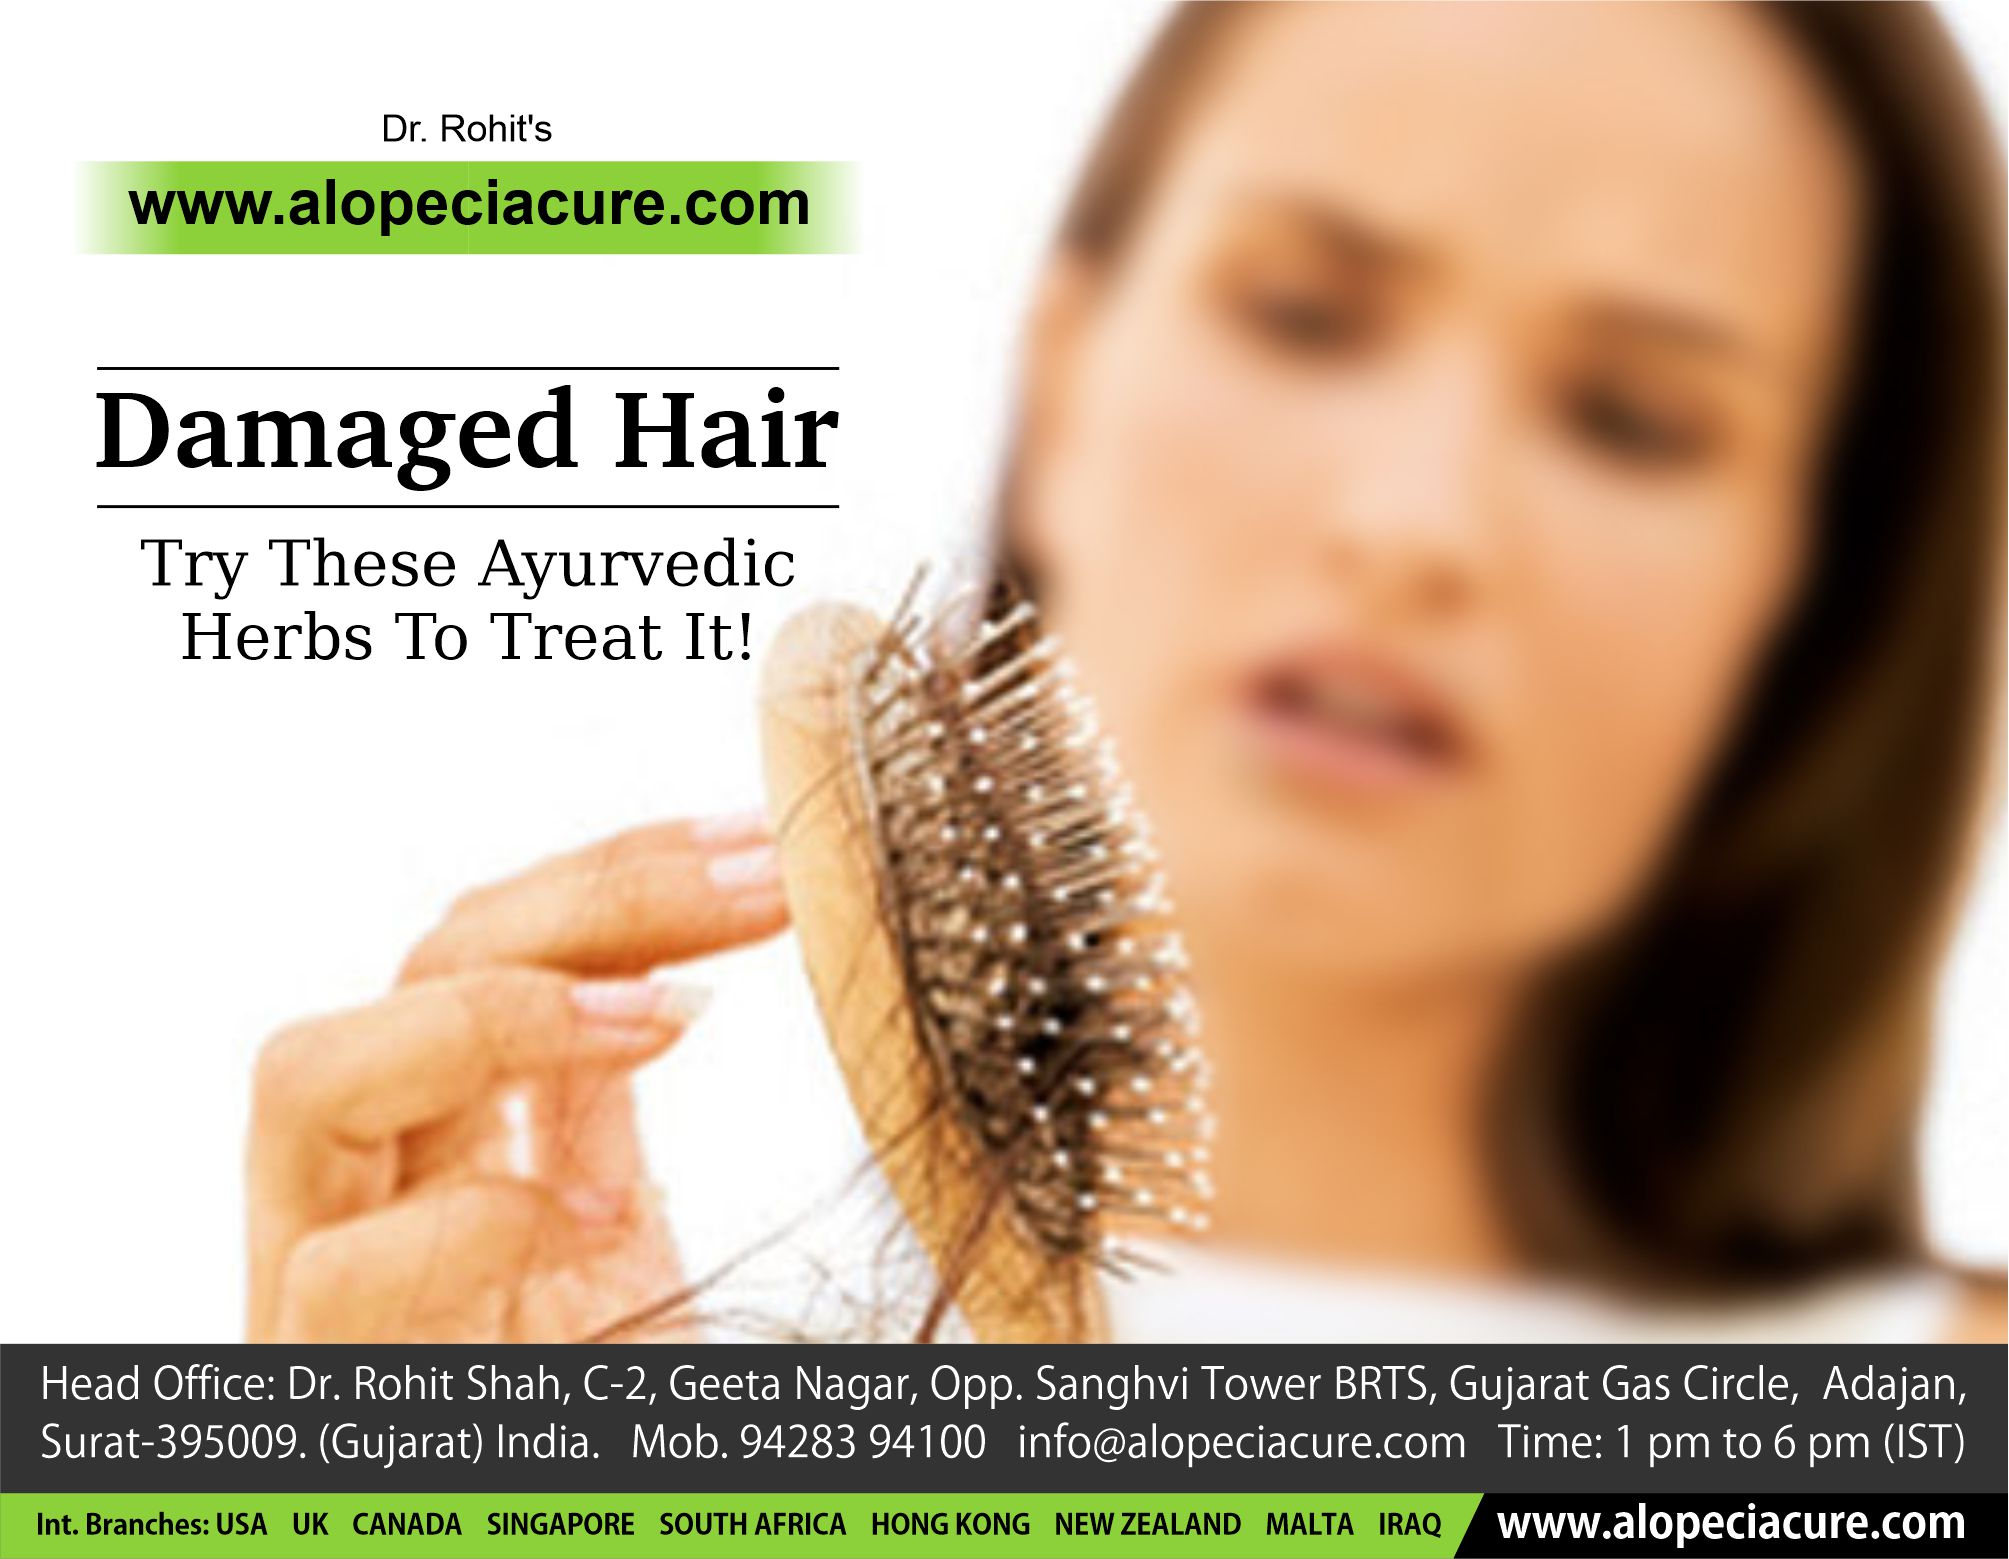 Damaged Hair - Try These Ayurvedic Herbs To Treat It!